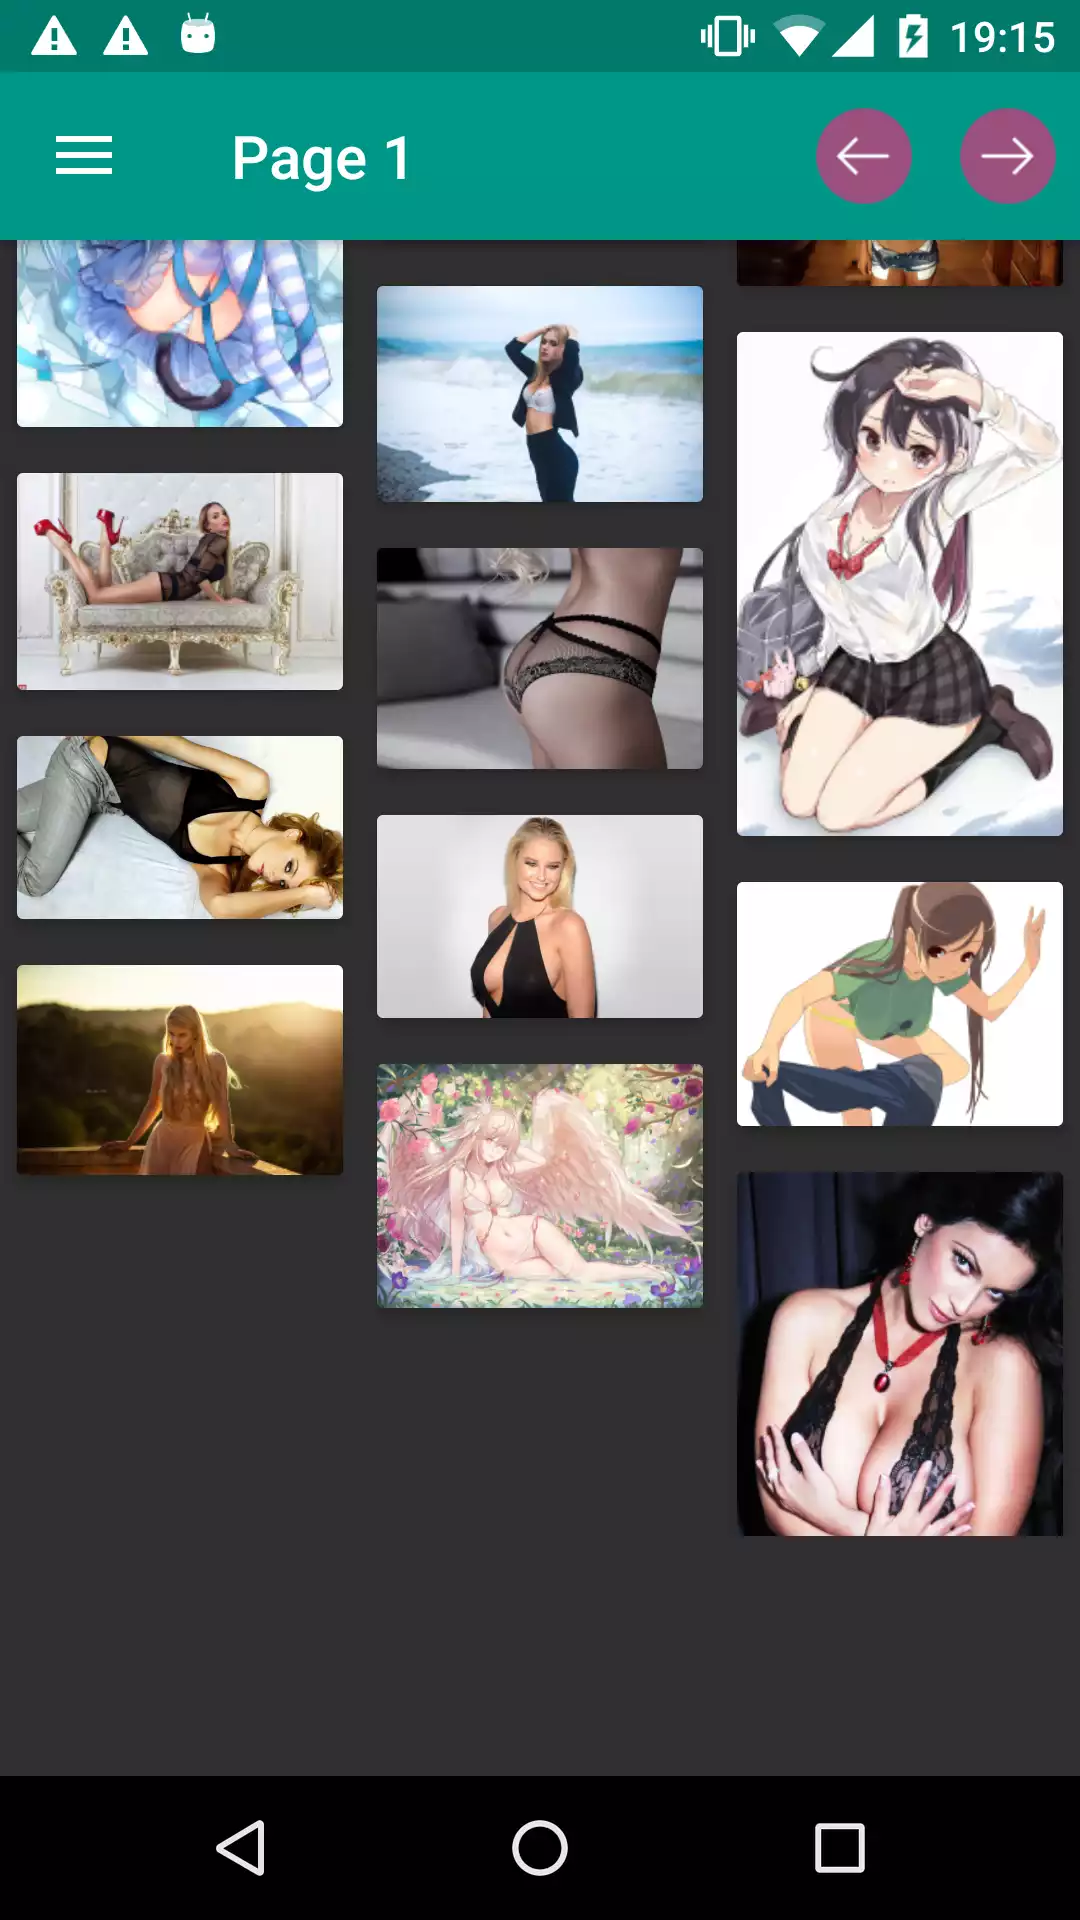 See through clothing picture,nhentai,panties,app,and,images,game,hentai,gallery,adult,apps,sexy,apk,caprice,android,lisa,backgrounds,pictures,wallpapers,mature,puzzles,phone,hantai,download